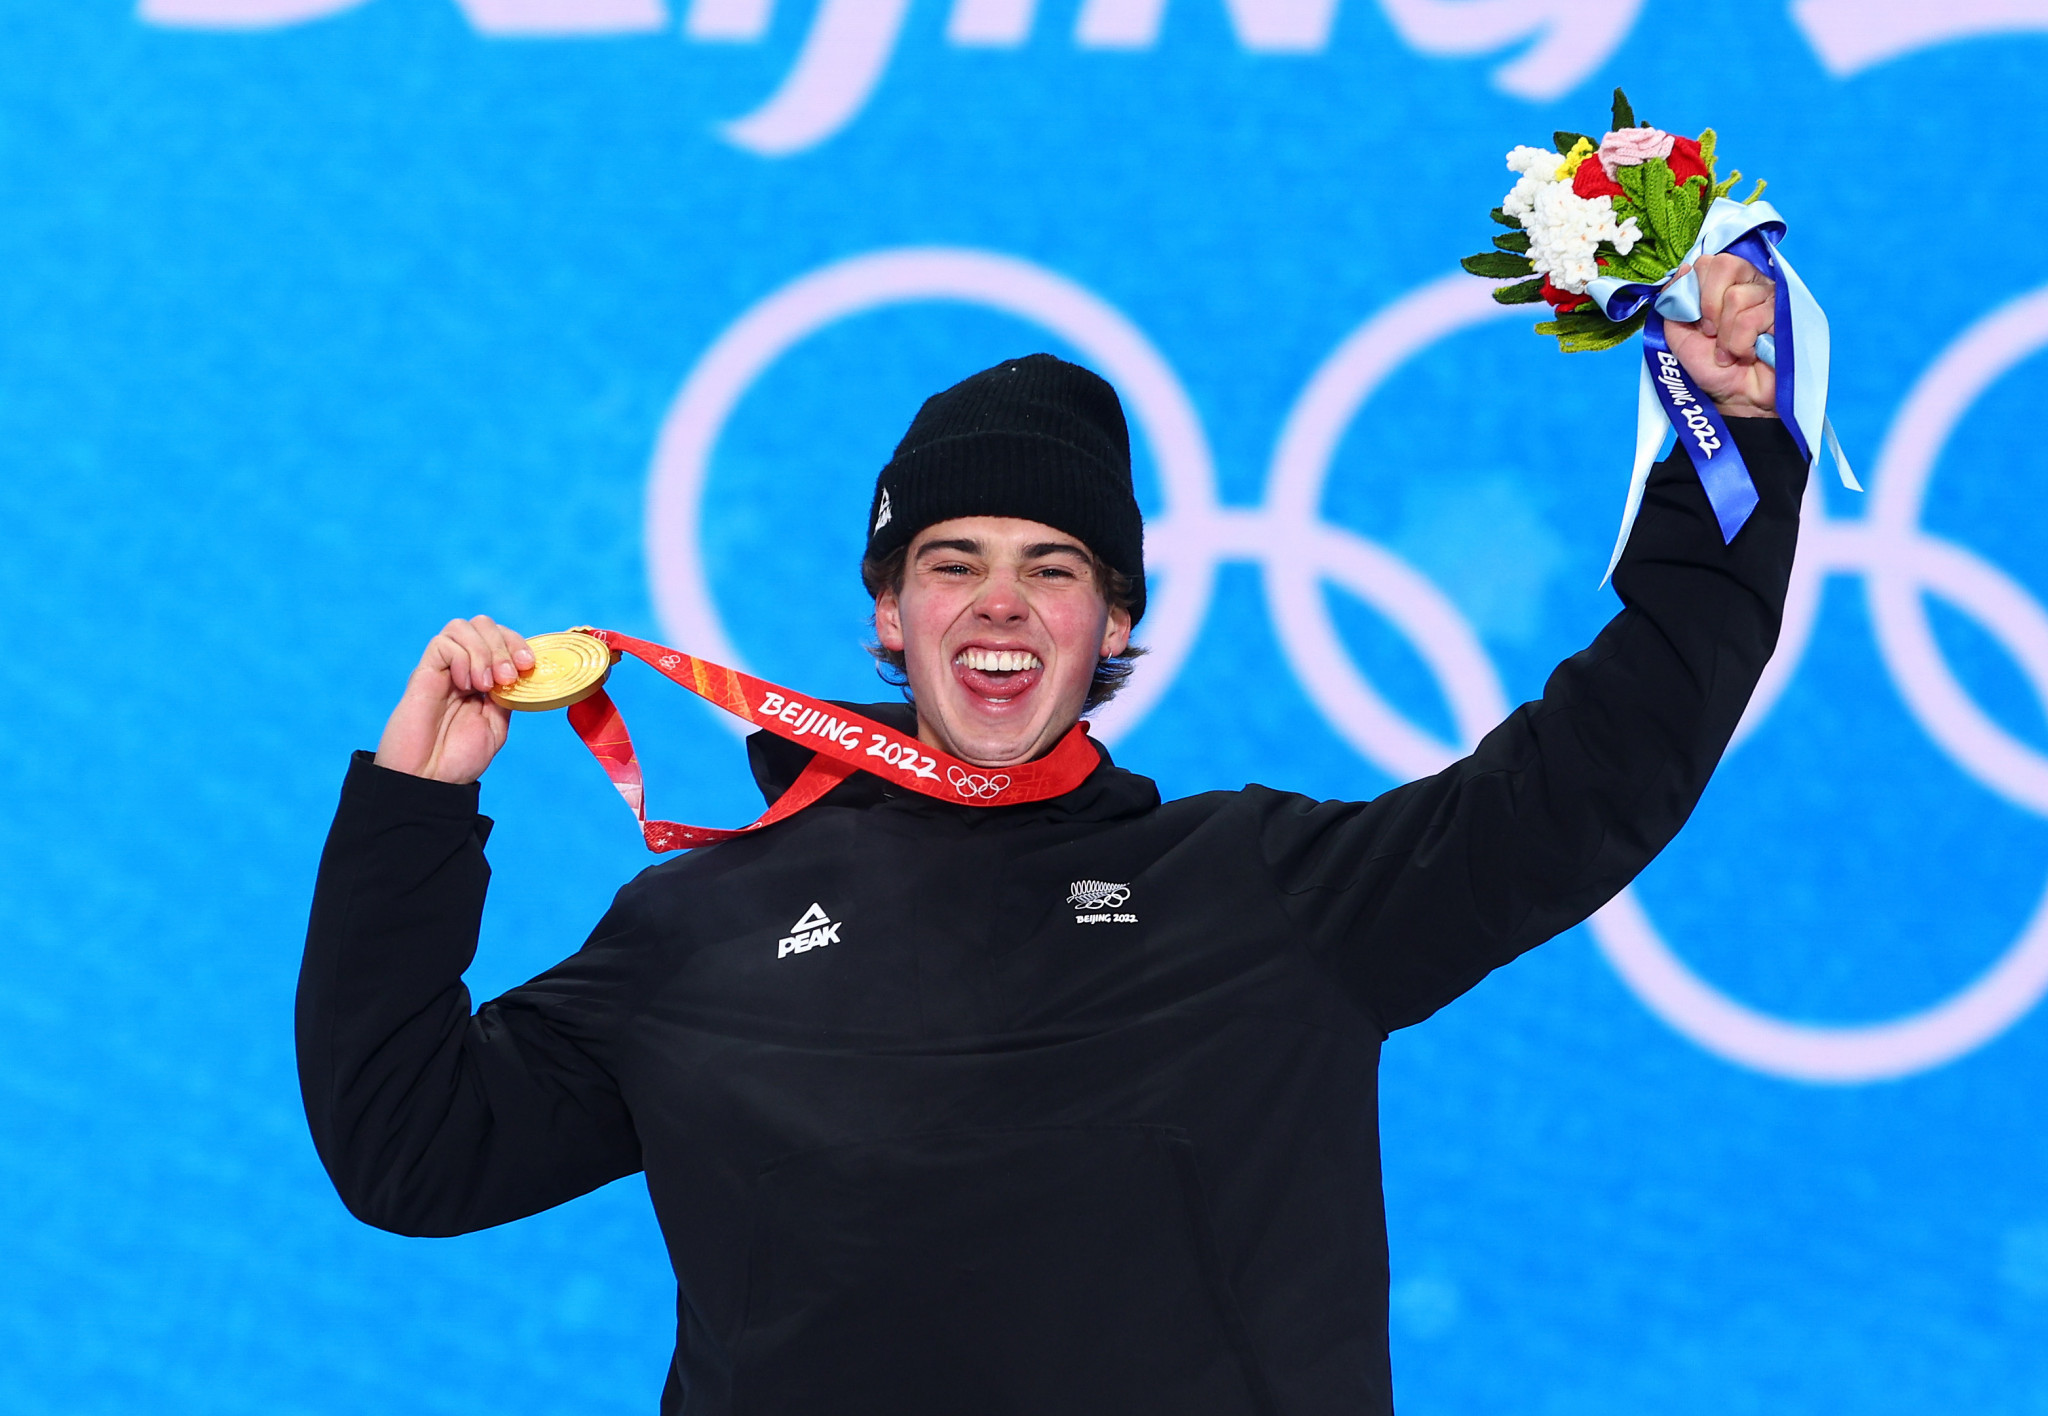 History-maker Porteous to carry New Zealand flag at Beijing 2022 Closing Ceremony 